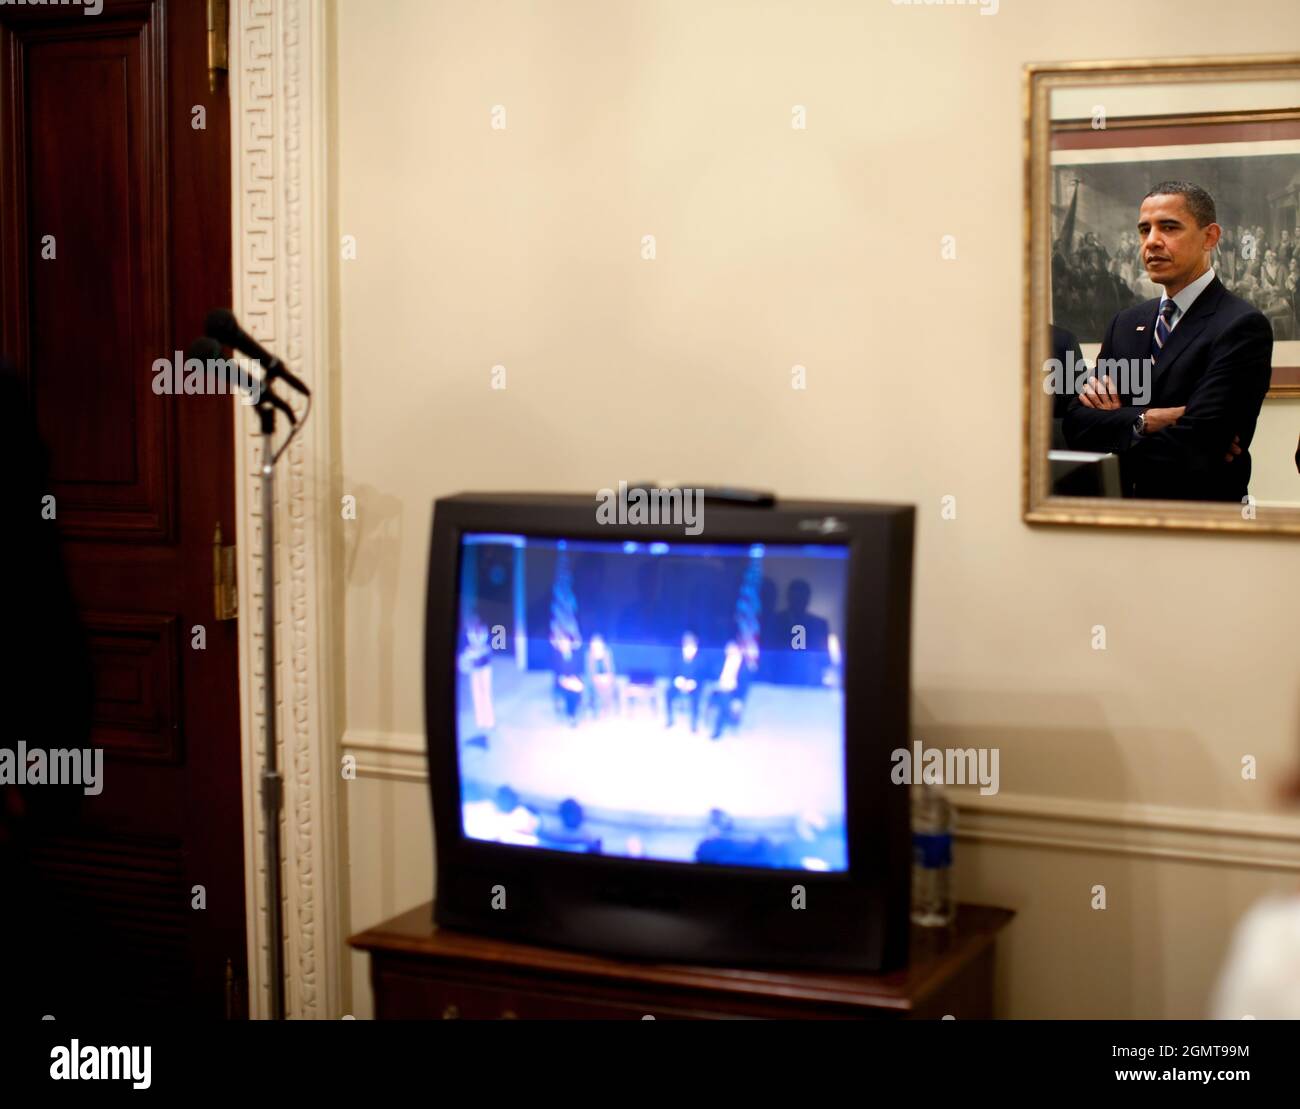 President Barack Obama is reflected in a mirror as he waits backstage before being introduced for remarks at a Latino Town Hall meeting on the H1N1 swine flu virus May 8, 2009.   Official White House Photo by Pete Souza.  This official White House photograph is being made available for publication by news organizations and/or for personal use printing by the subject(s) of the photograph. The photograph may not be manipulated or used in materials, advertisements, products, or promotions that in any way suggest approval or endorsement of the President, the First Family, or the White House. Stock Photo